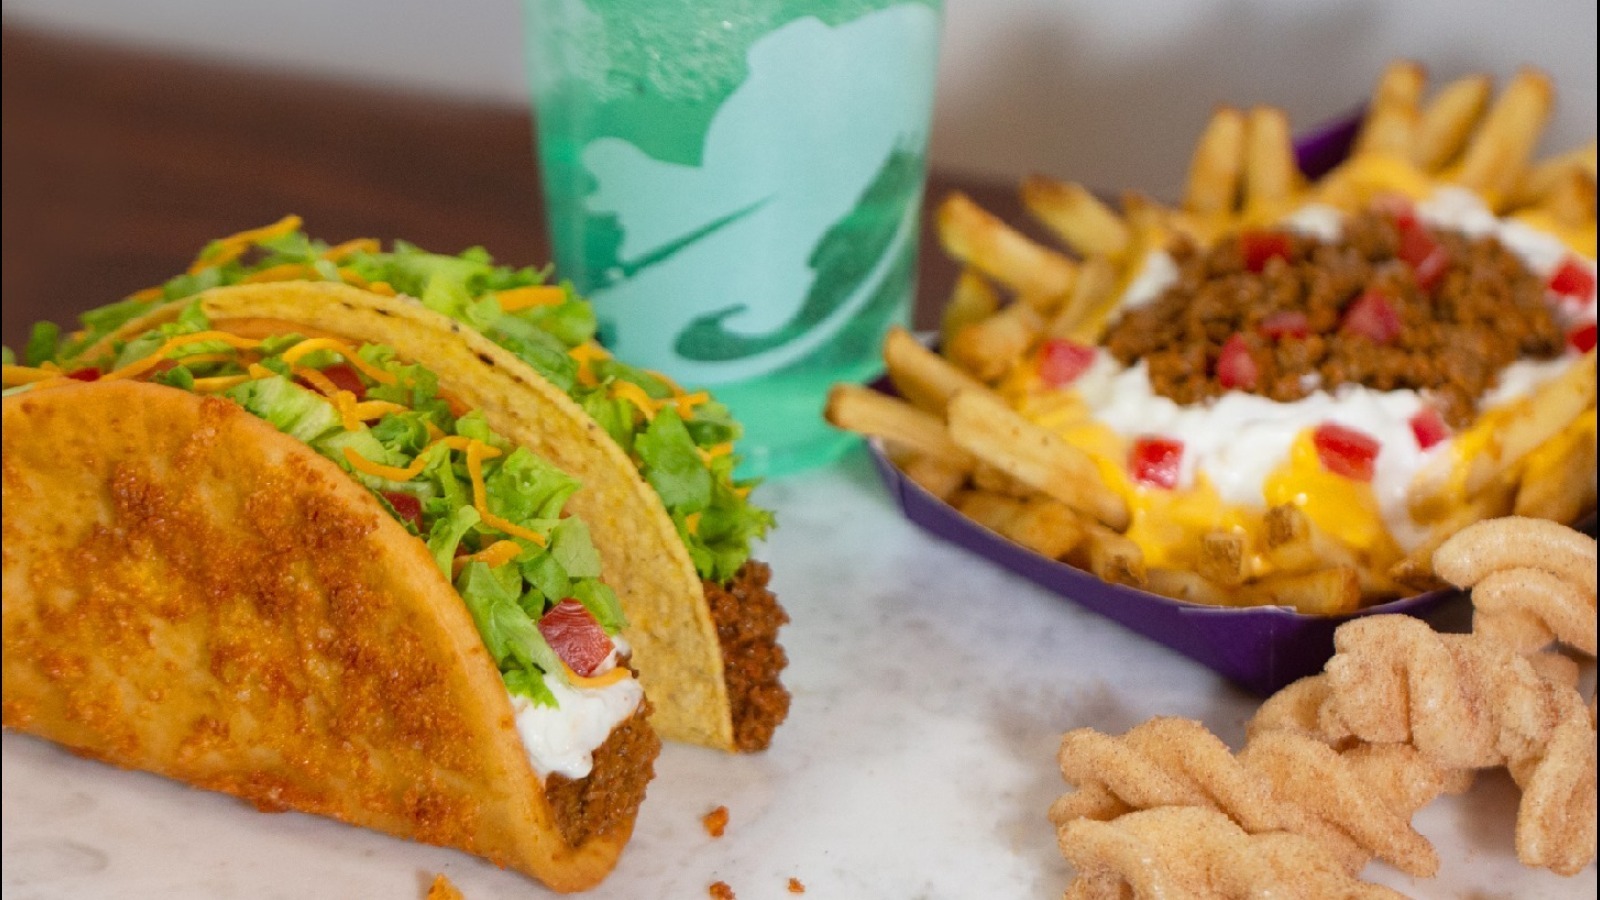 Why Taco Bell Canada Wants Fans To 'Get Messy'